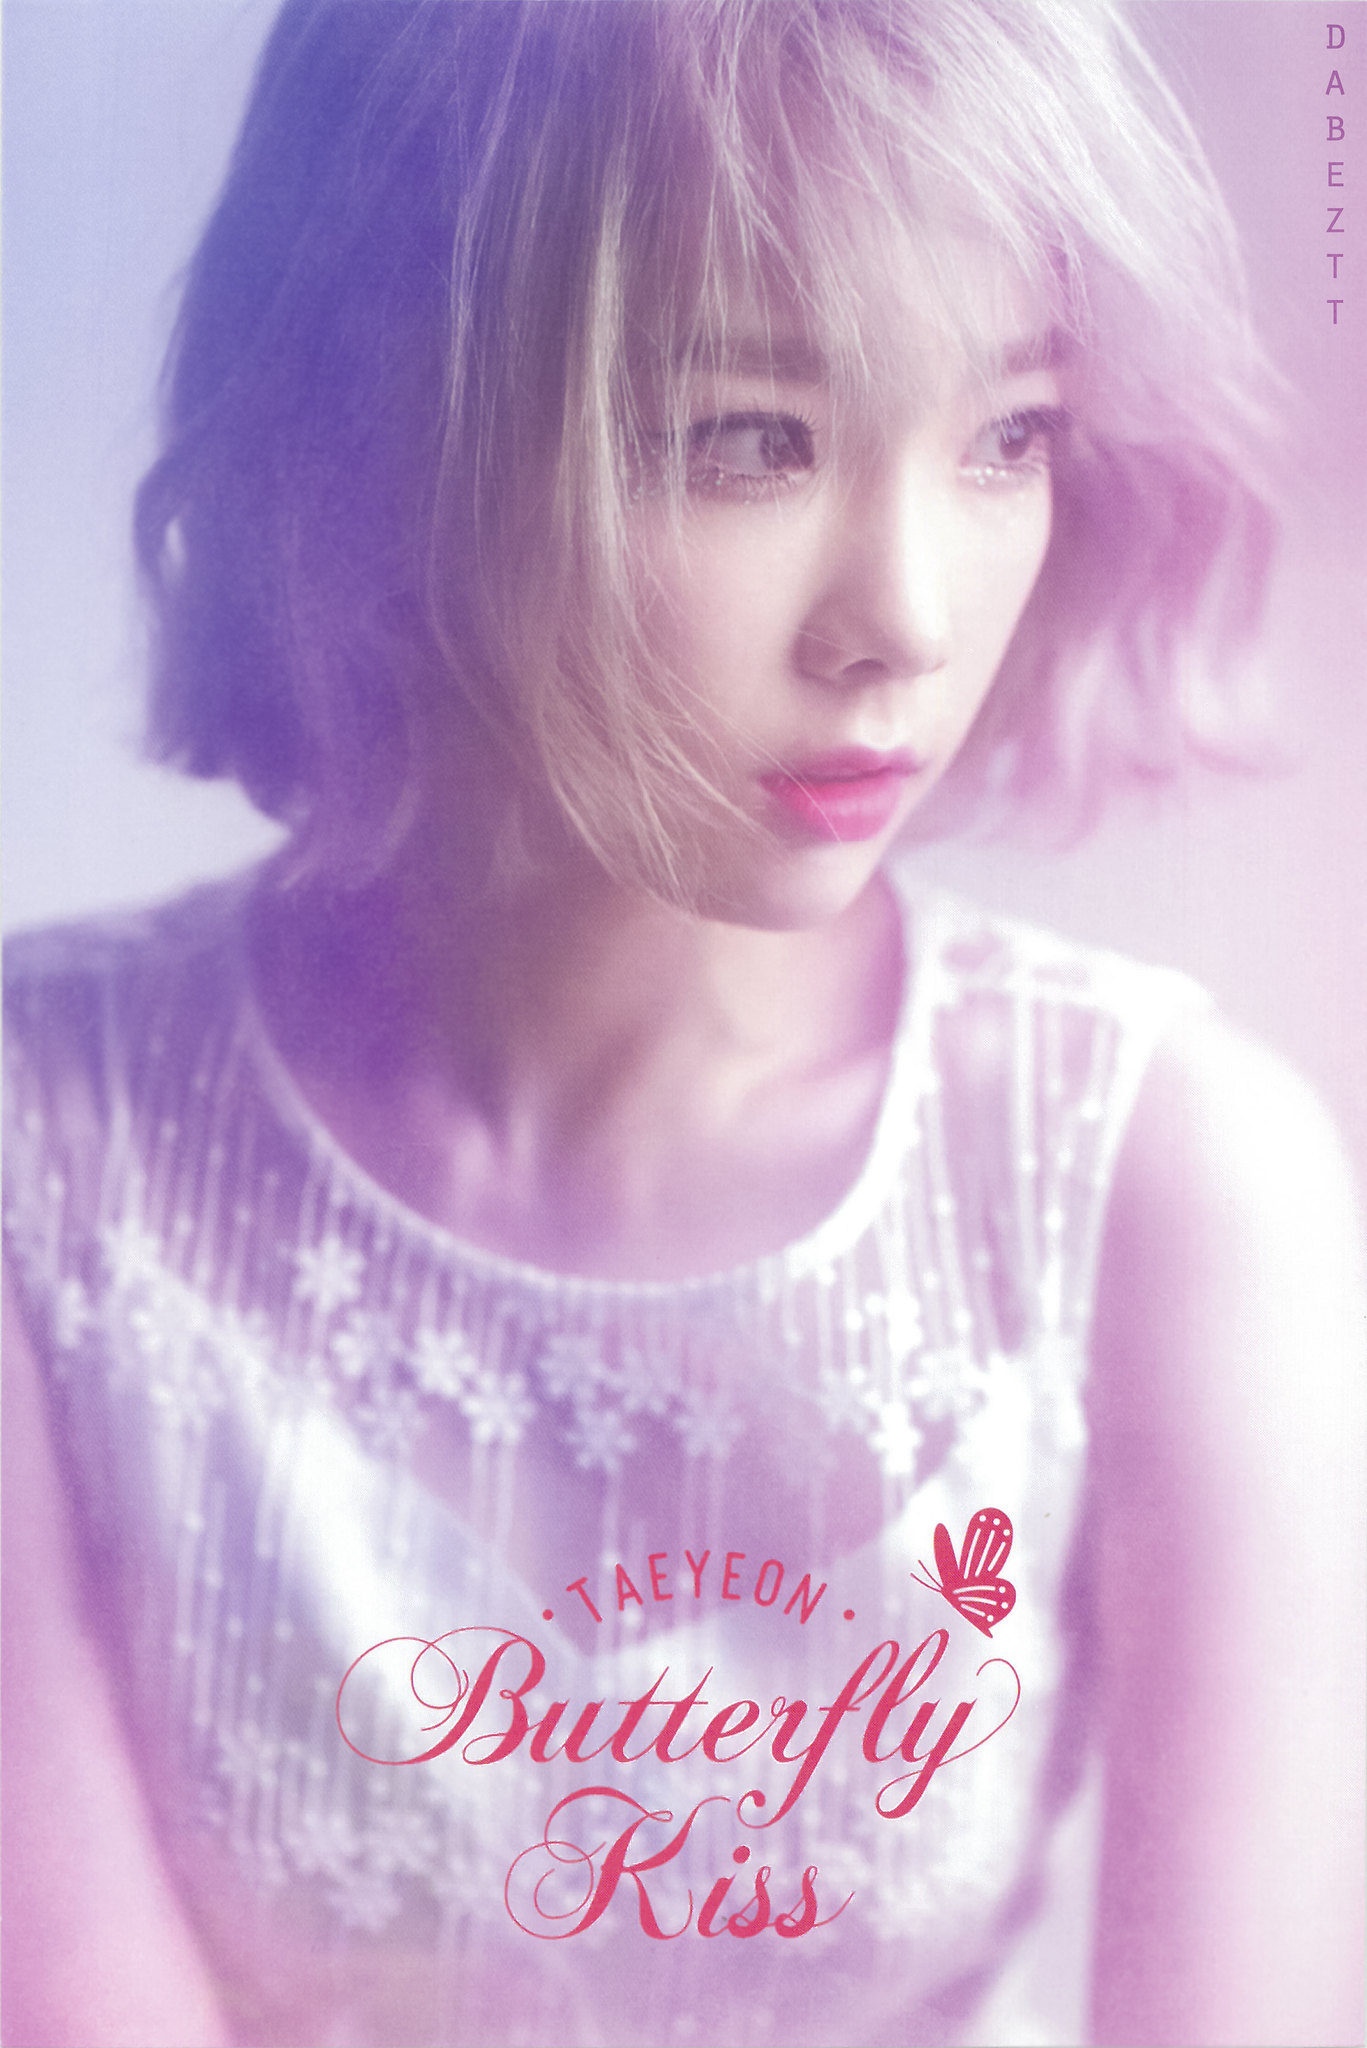 [PIC][24-05-2016]TaeYeon @ Solo Concert “Butterfly Kiss” 28275754145_5380a2639c_k